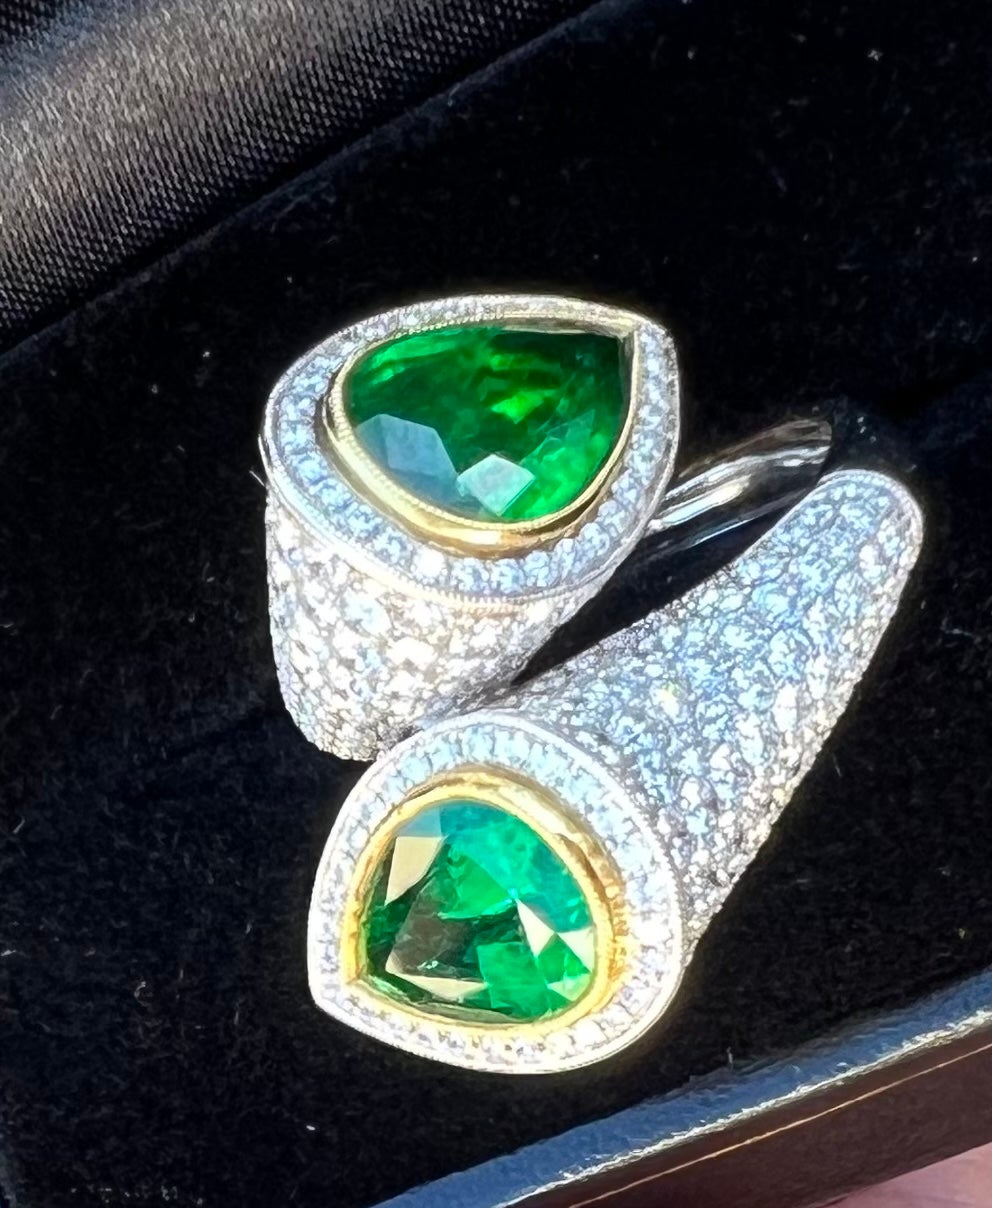 10.18 Carat Colombian Emerald and Diamond "Toi et Moi" 18k Gold Cocktail Ring